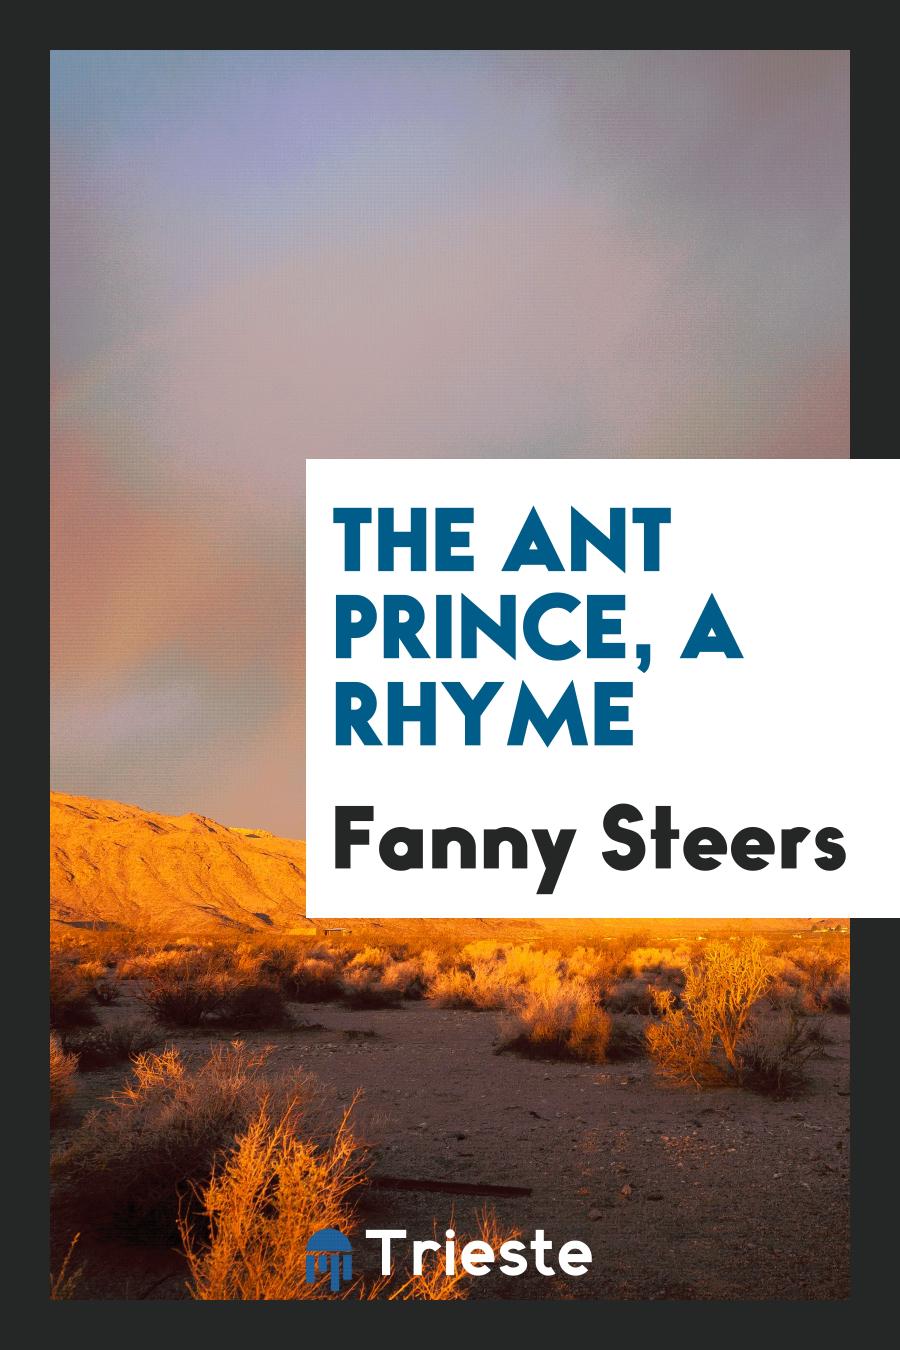 The ant prince, a rhyme